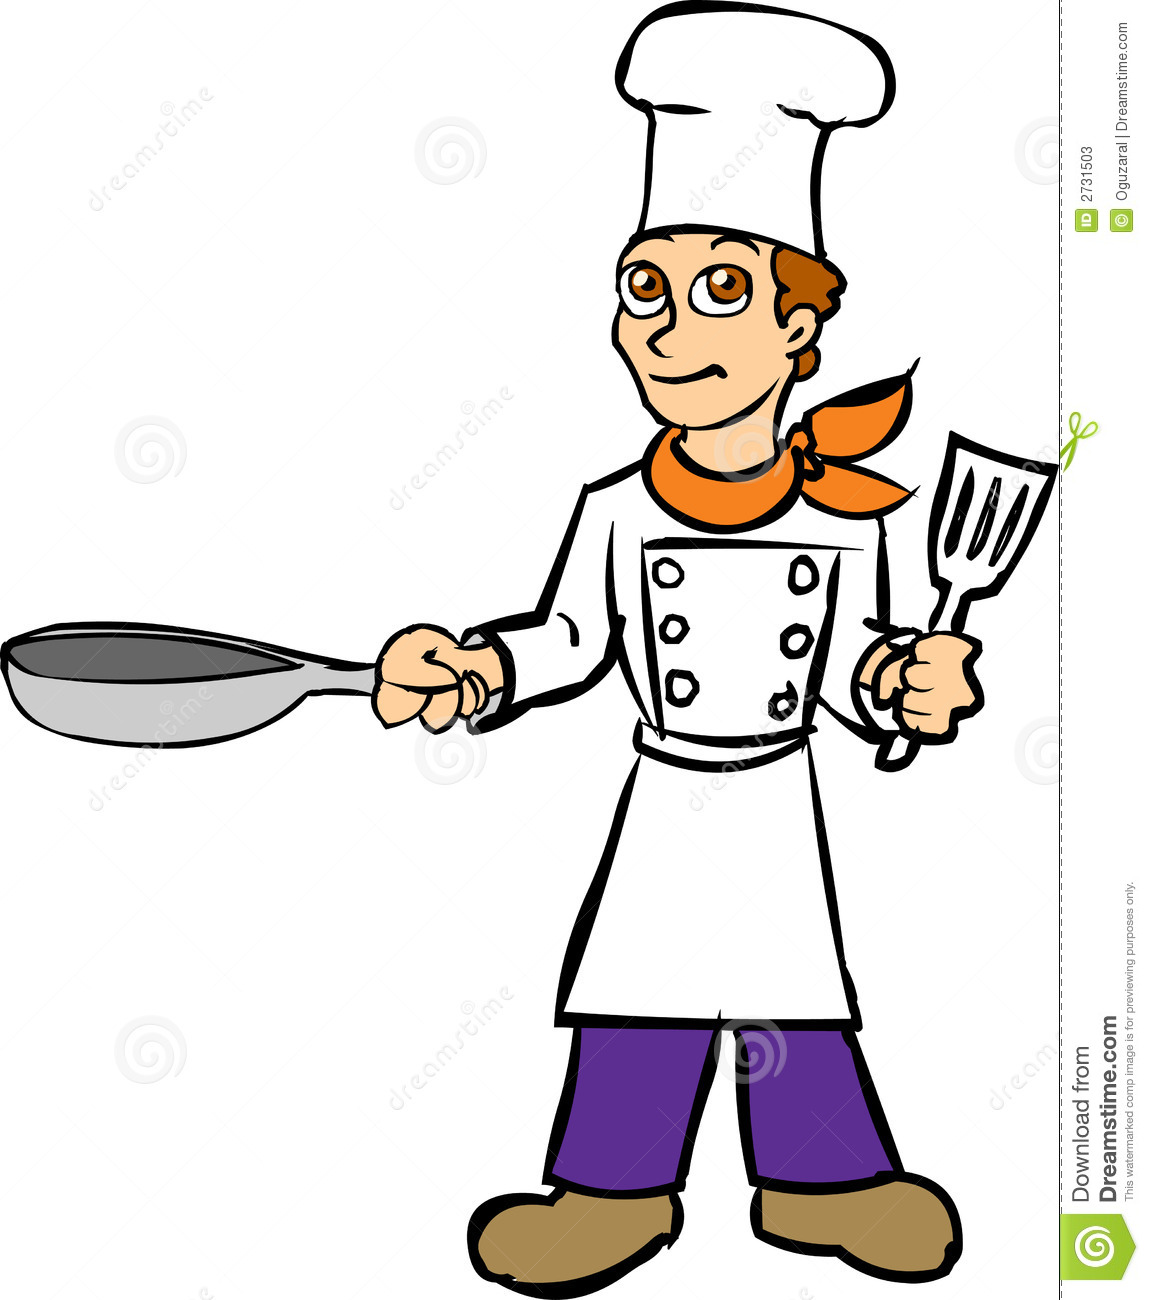 clipart cooking images - photo #18